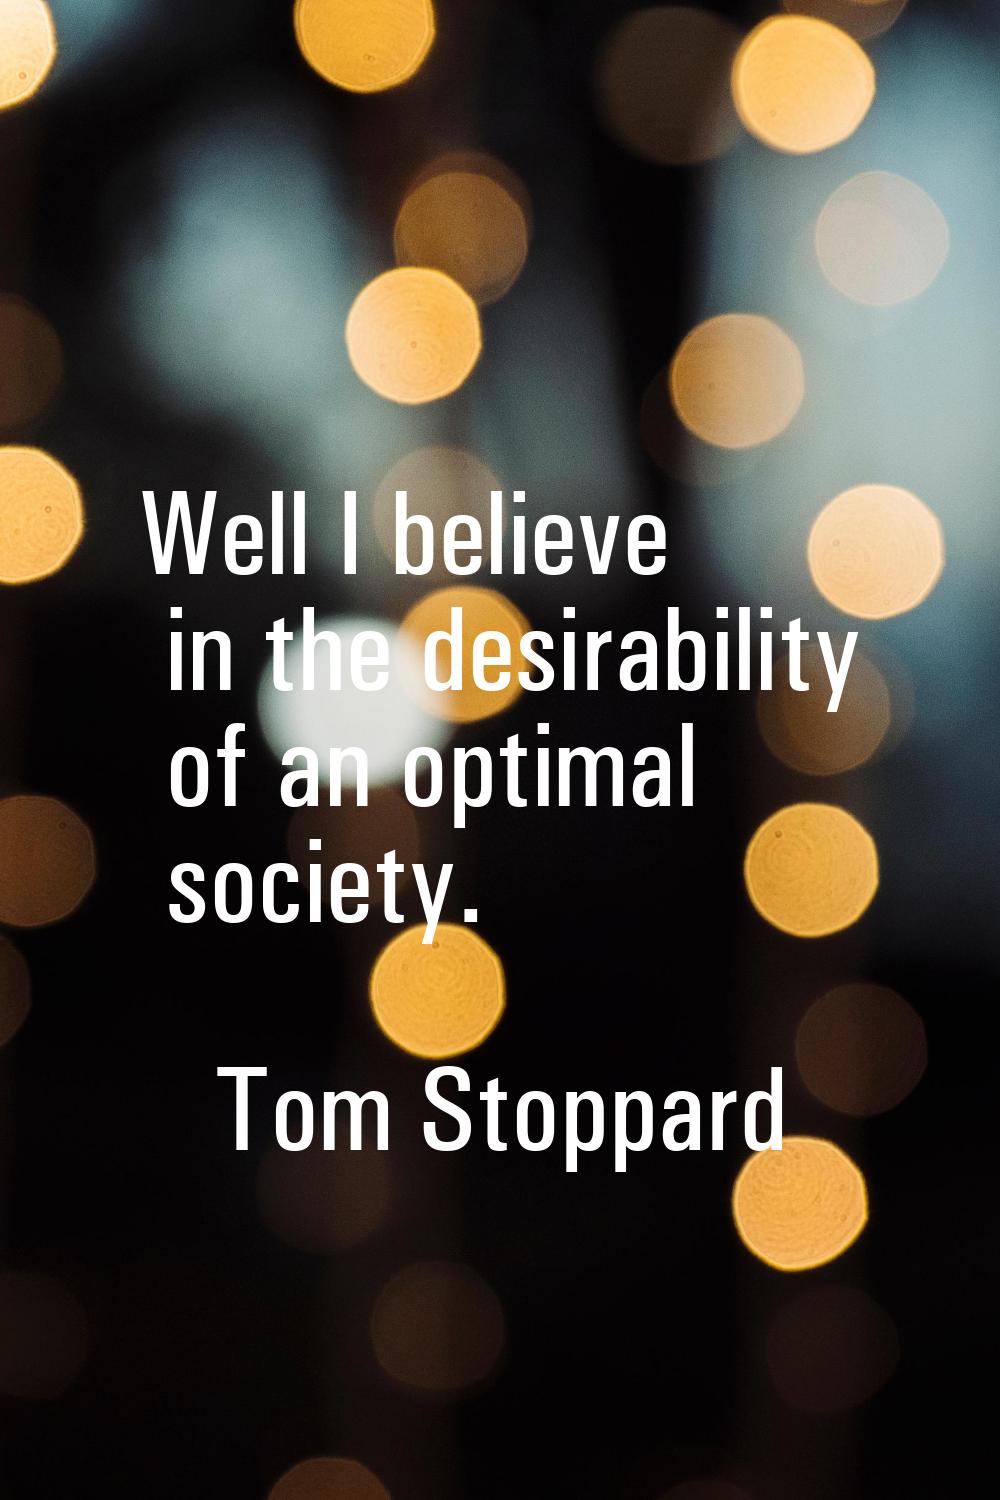 Well I believe in the desirability of an optimal society.